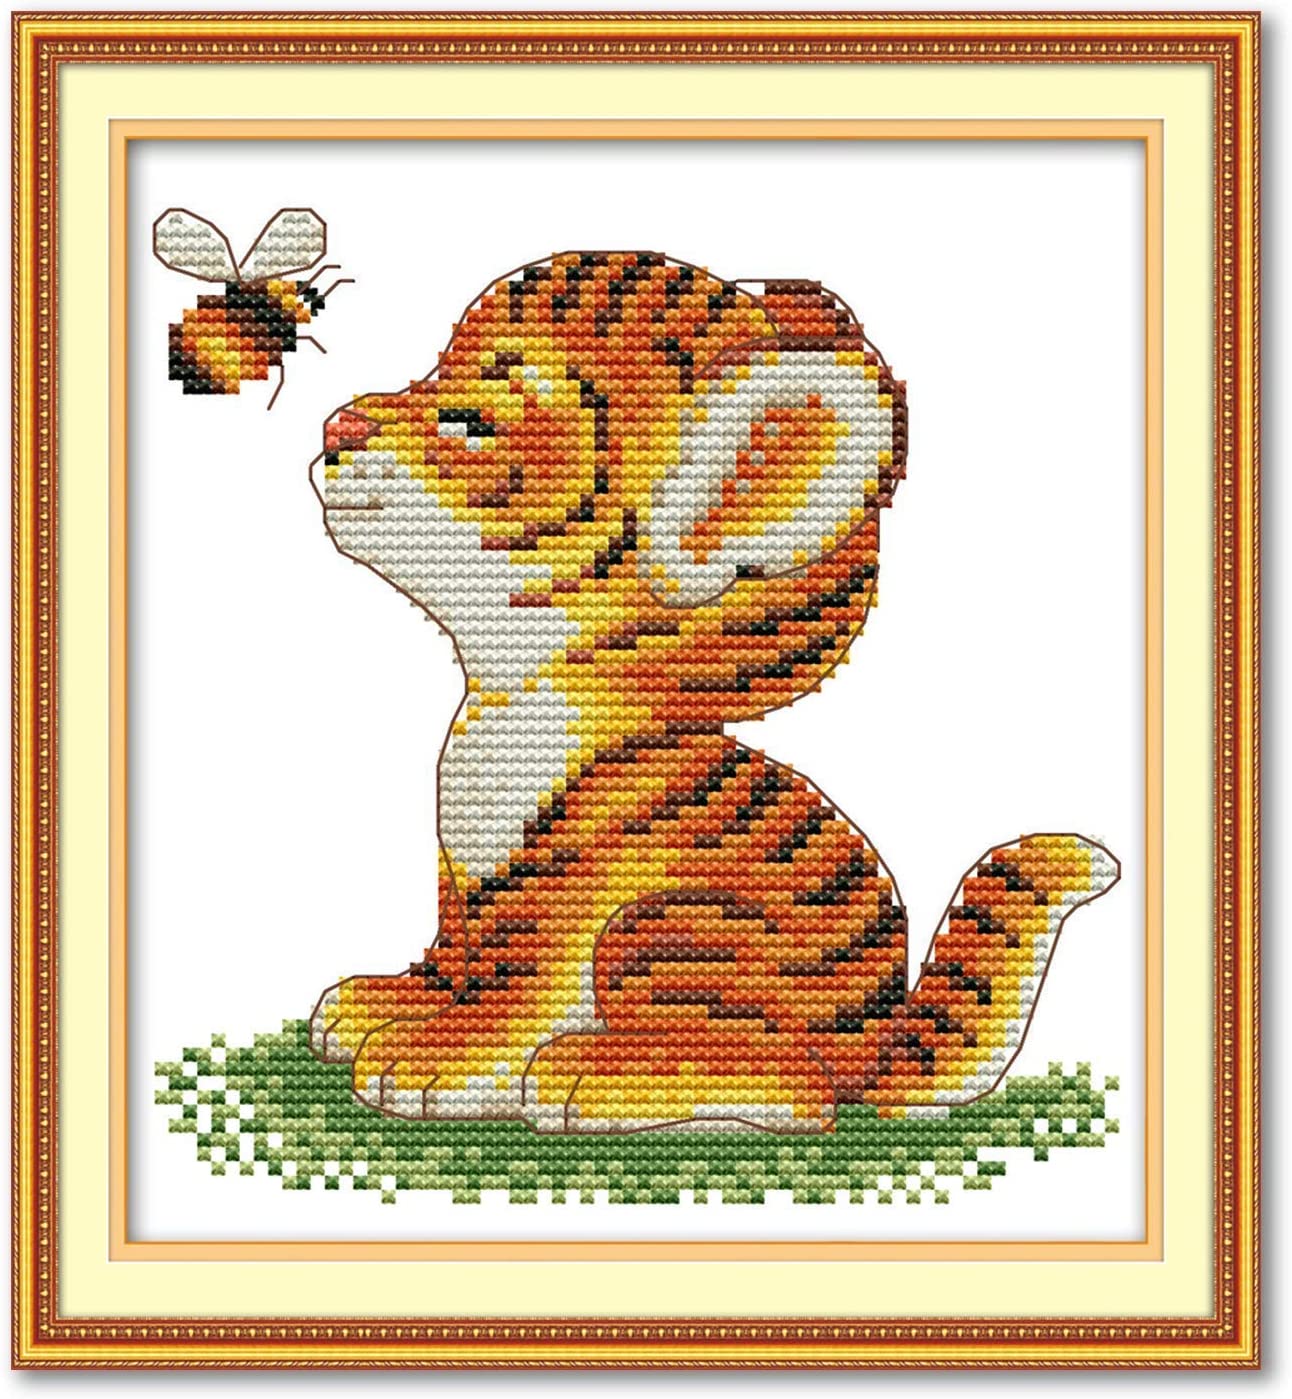 Printed Cross Stitch Kits 11CT 9X9 inch 100% Cotton Holiday Gift DIY Embroidery Starter Kits Easy Patterns Embroidery for Girls Crafts DMC Stamped Cross-Stitch Supplies Needlework Tiger and Bee